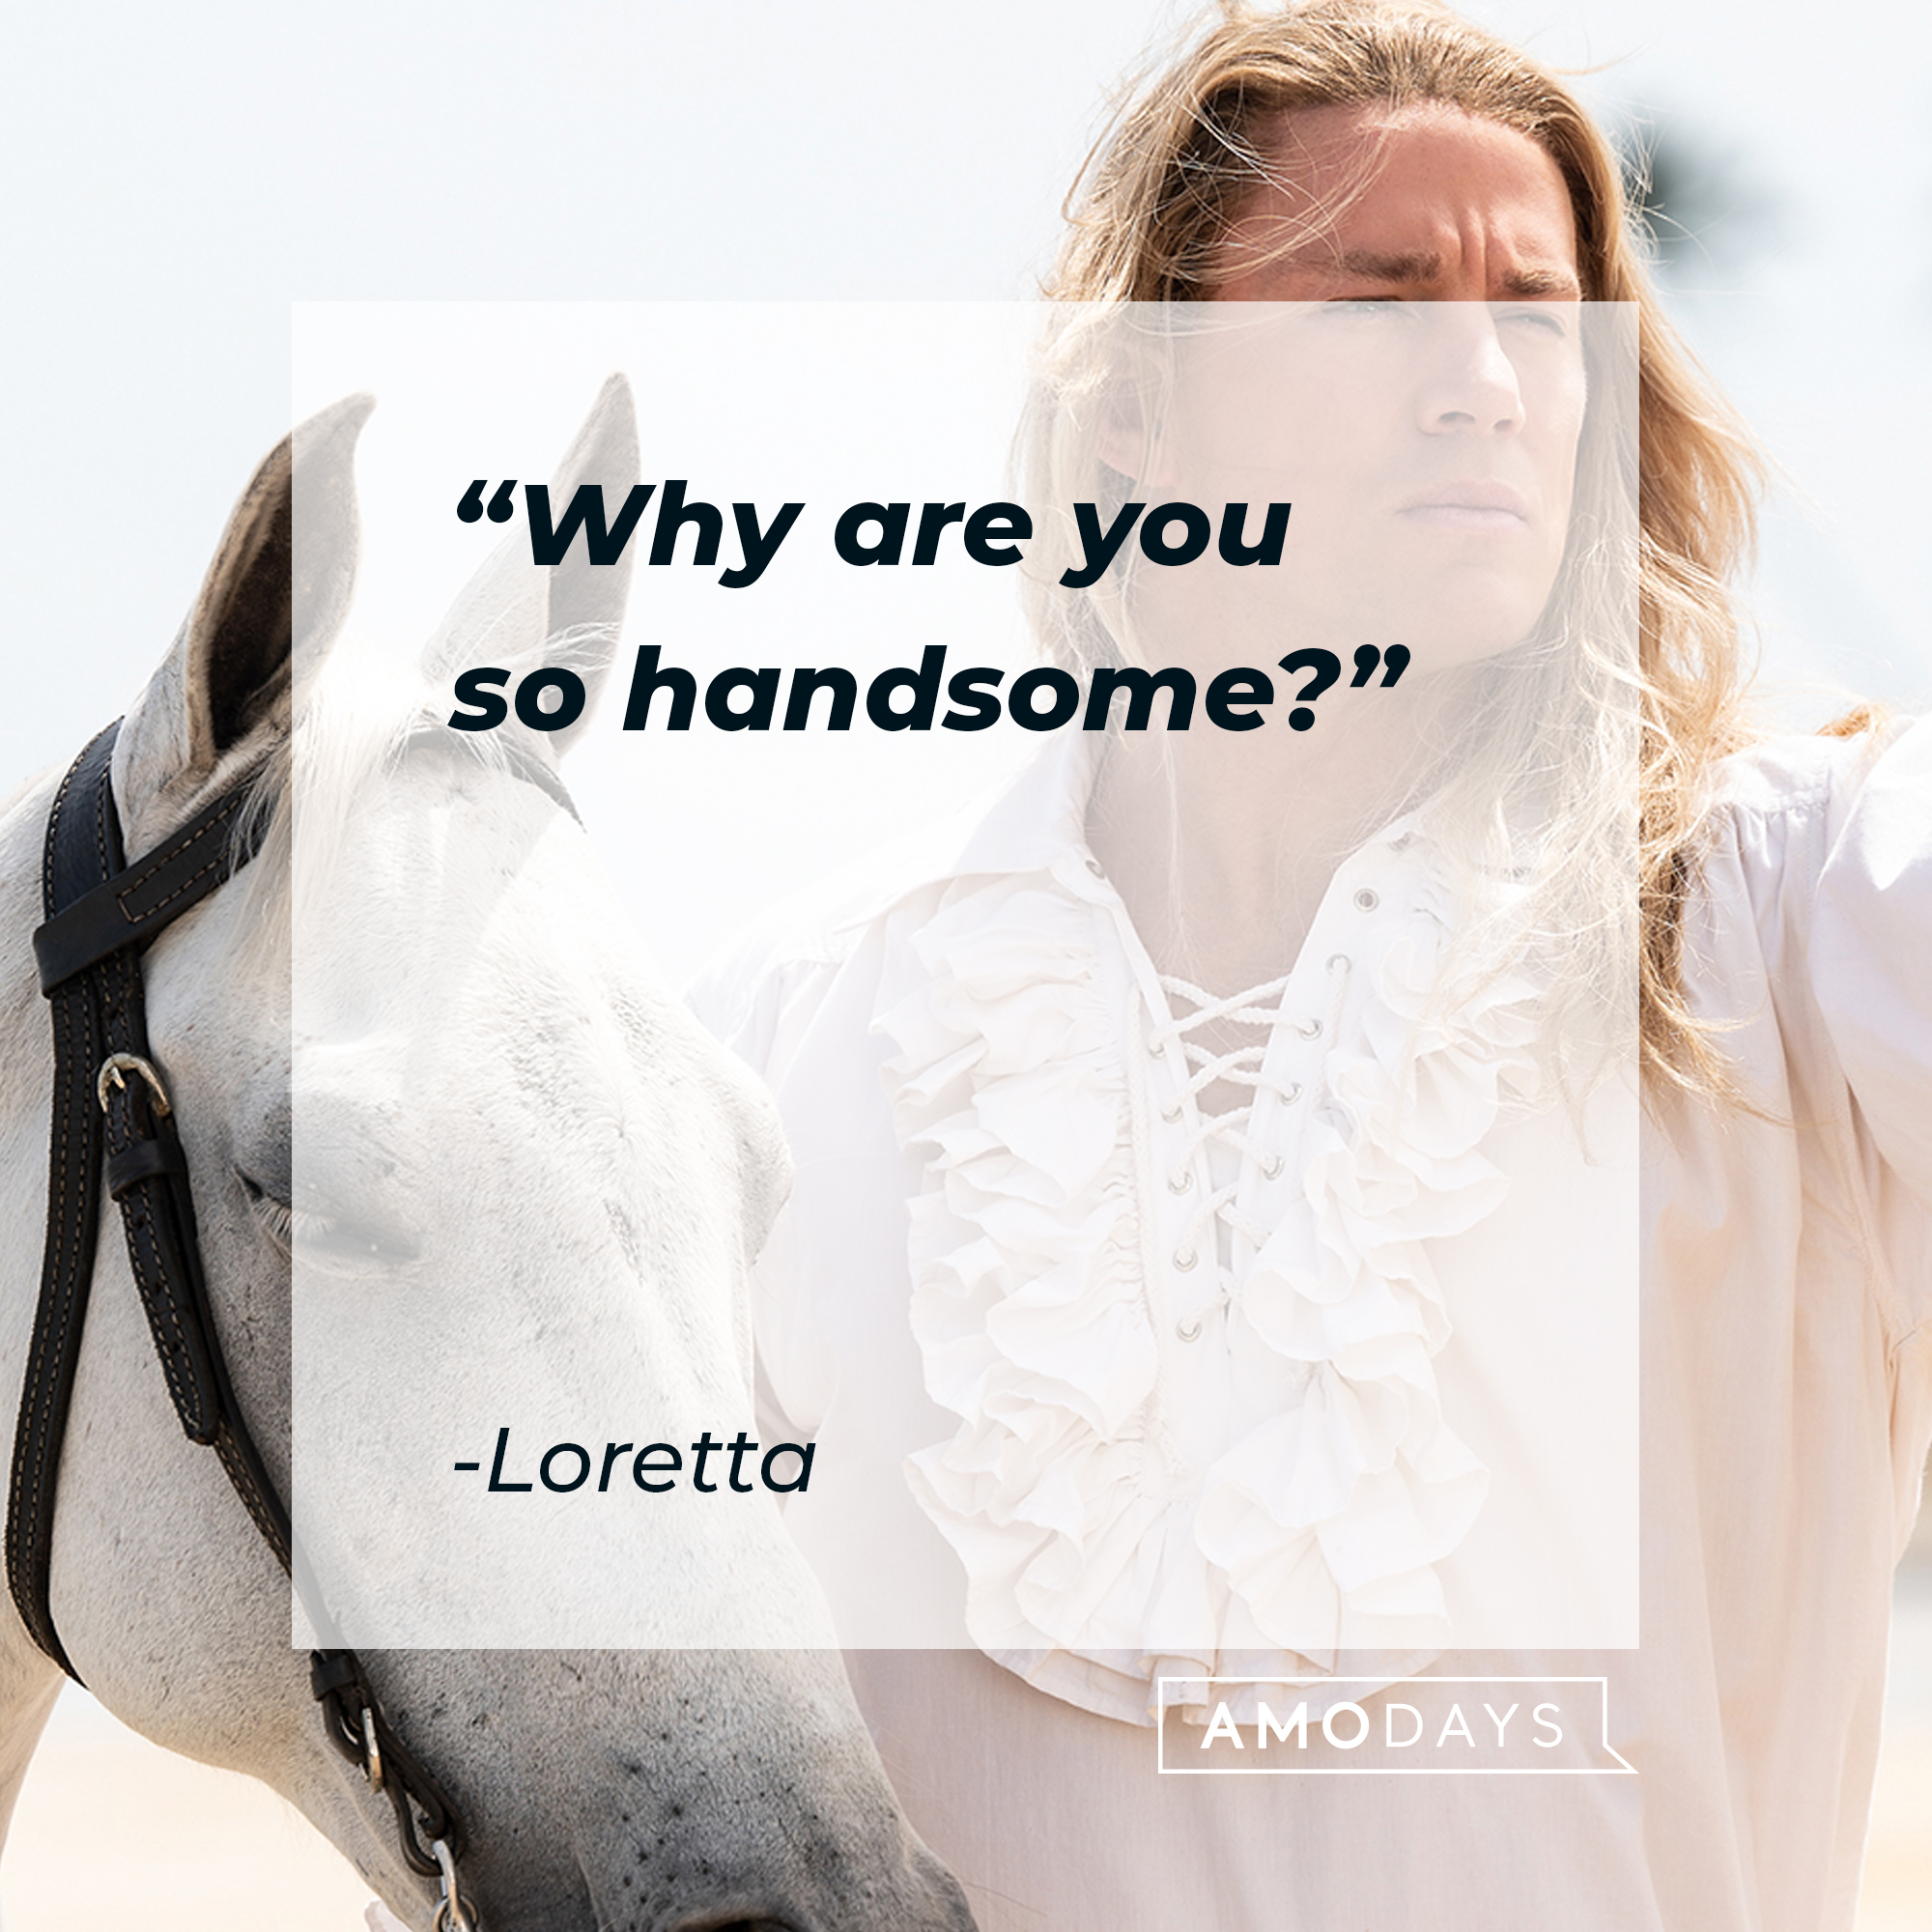 Loretta with her quote: "Why are you so handsome?" | Source: facebook.com/TheLostCityMovie